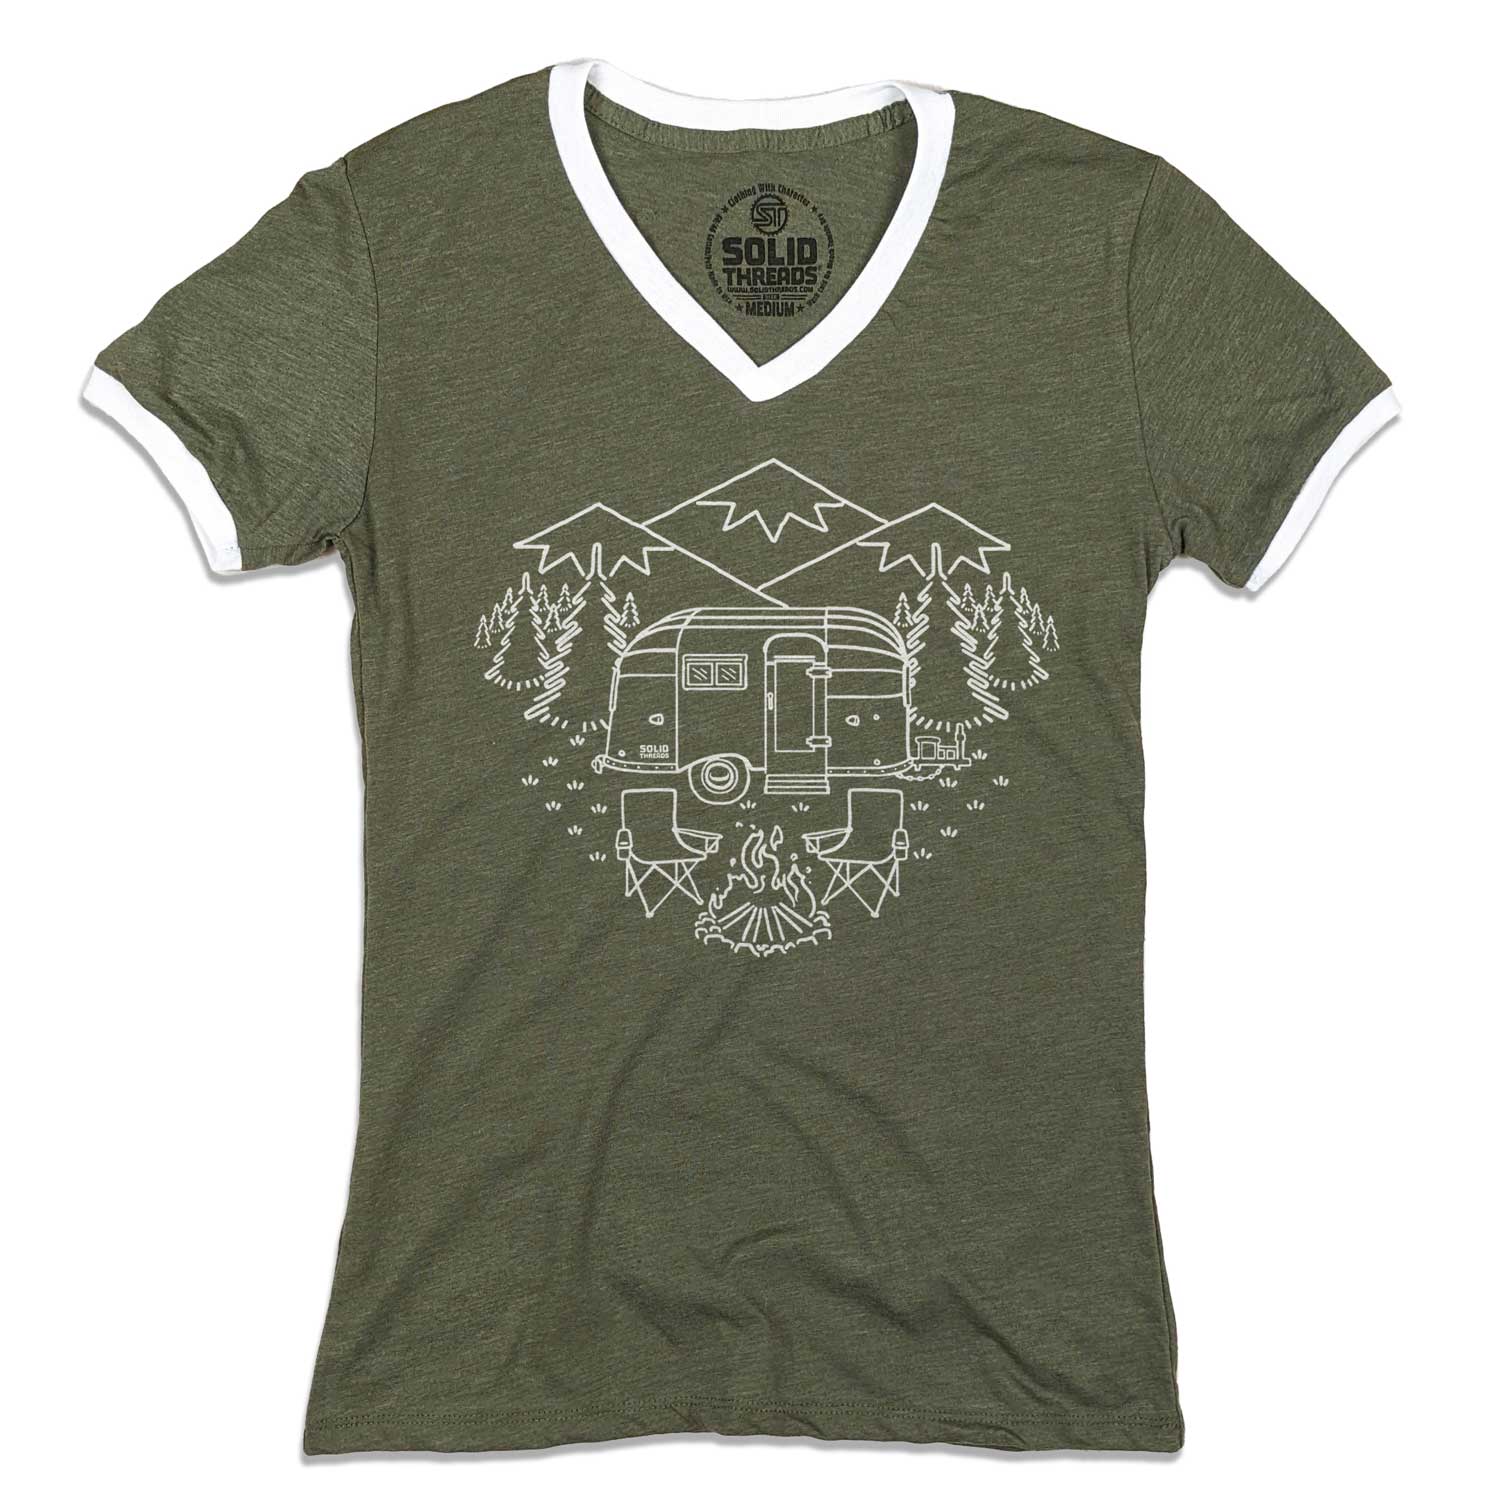 Women's Camp Site Vintage Graphic V-Neck Tee | Retro Airstream T-shirt | Solid Threads